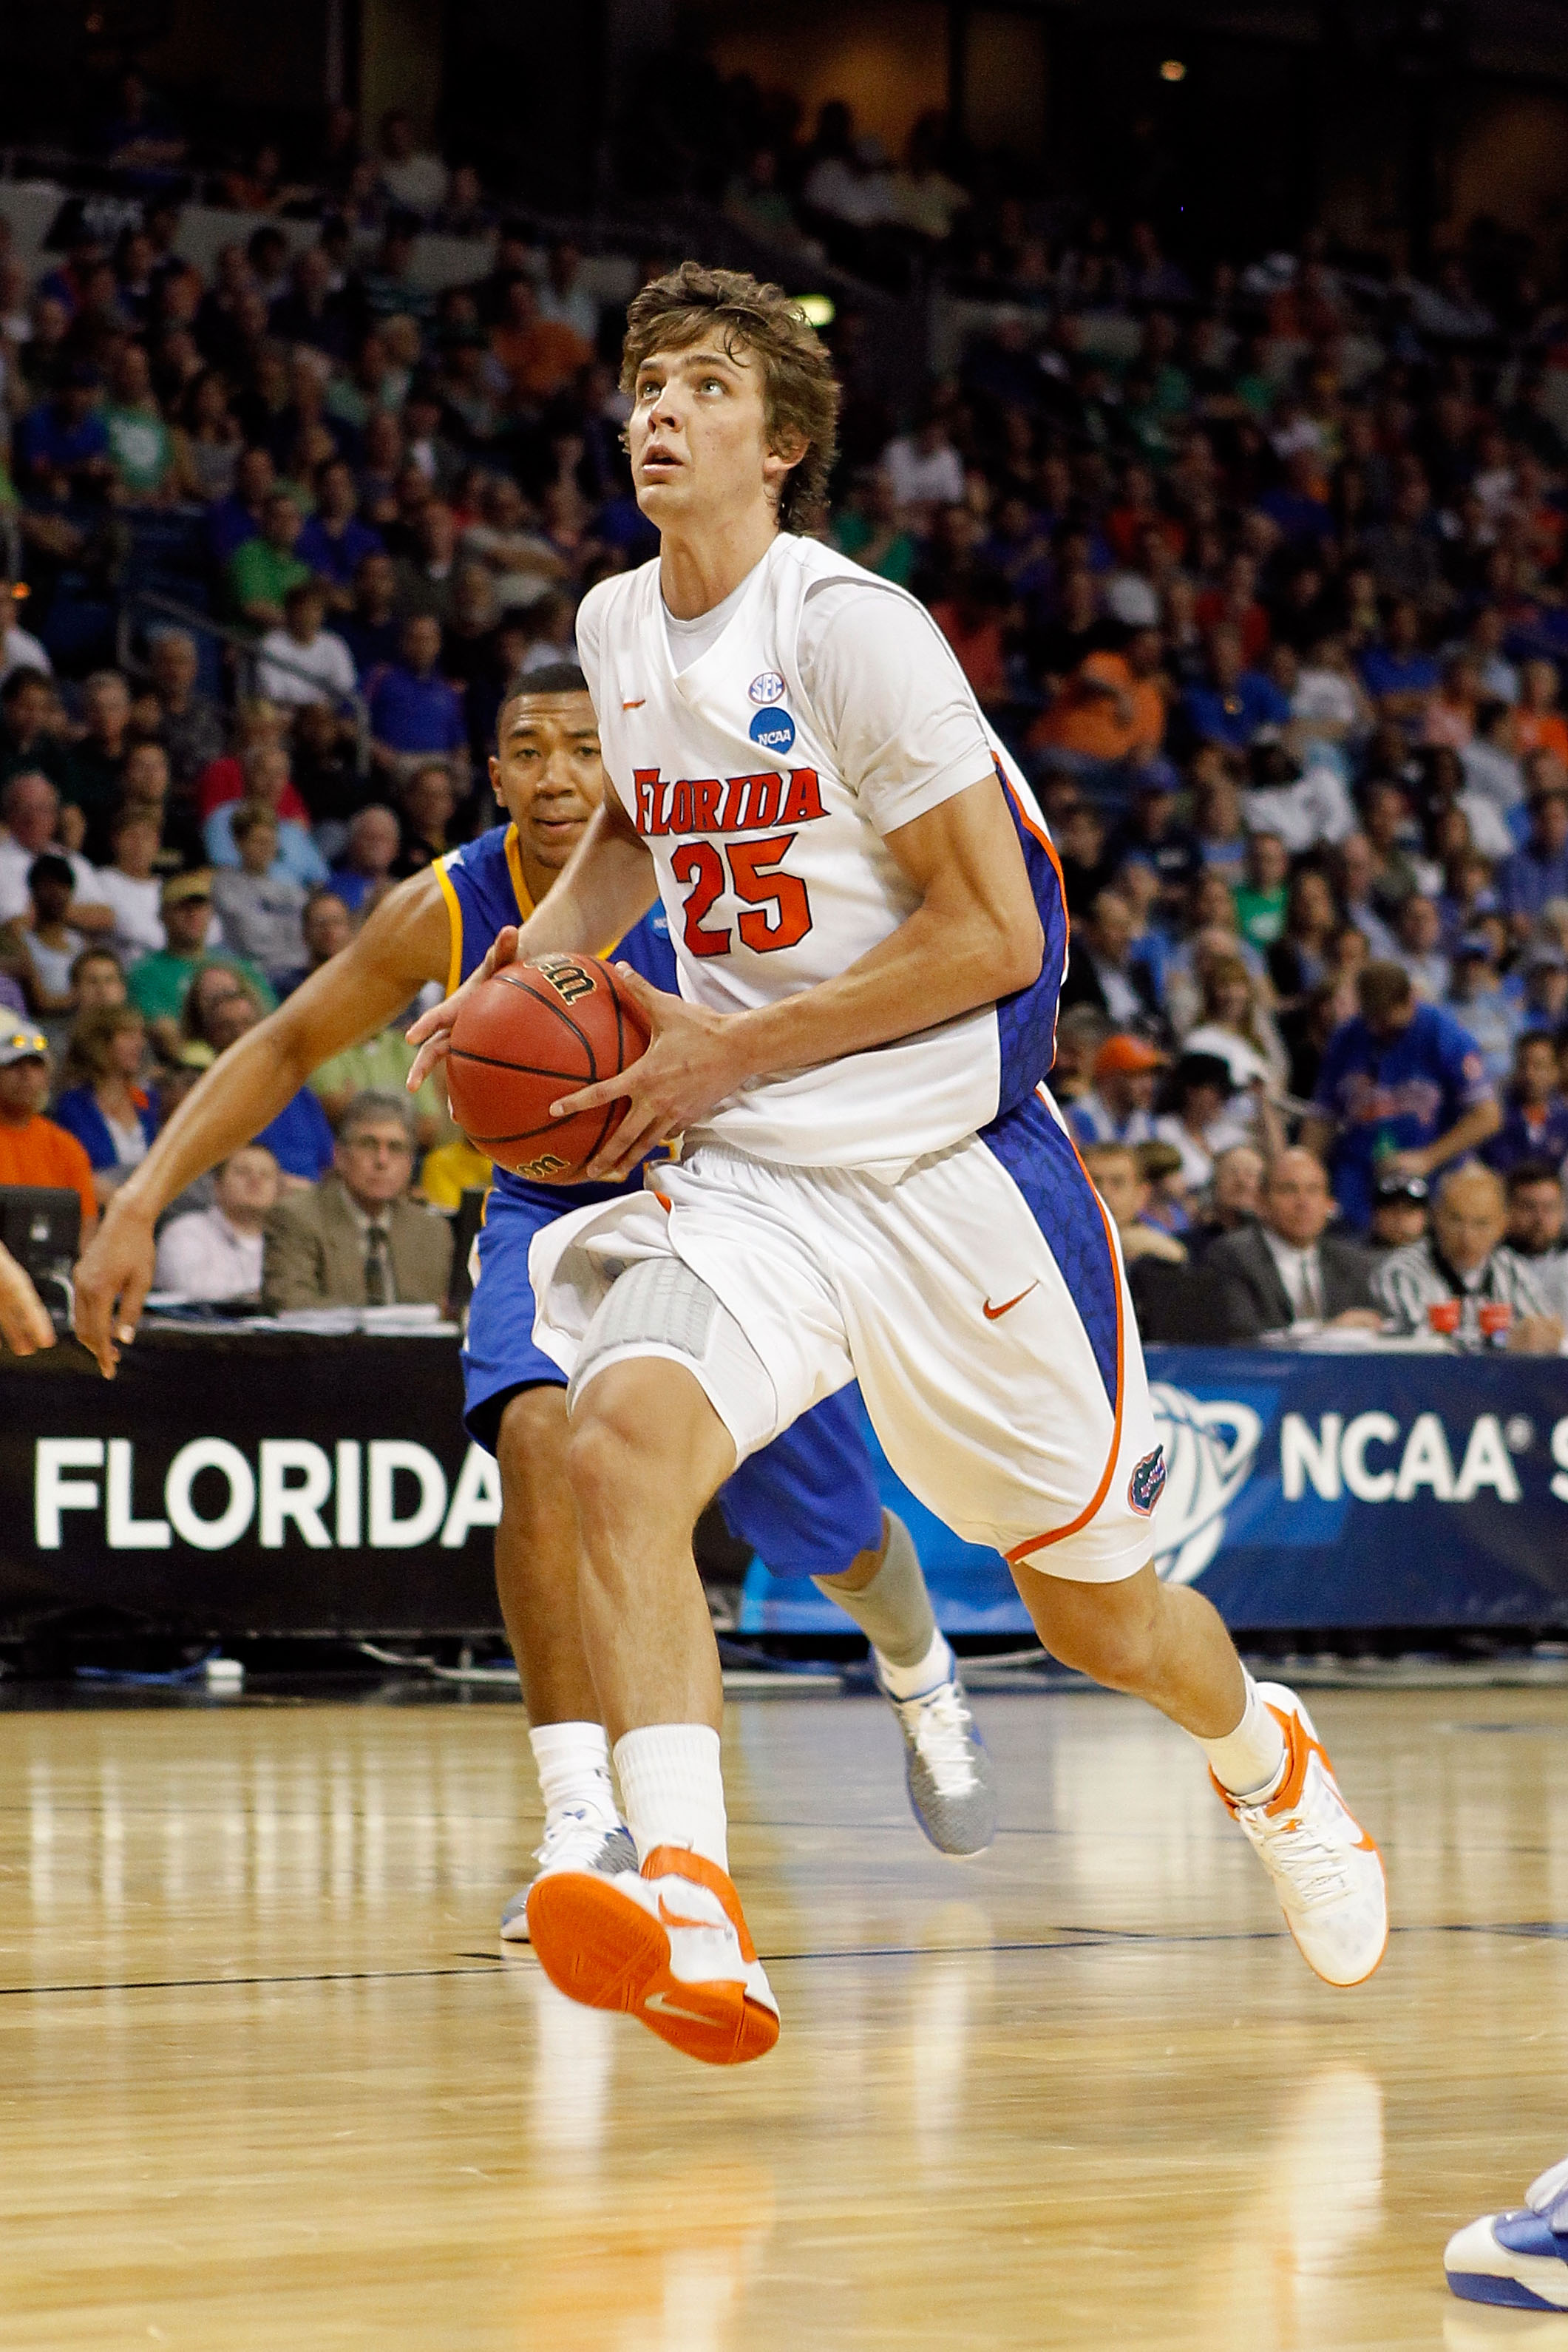 TAMPA, FL - MARCH 17:  Chandler Parsons #25 of the Florida Gators drives against the UC Santa Barbara Gauchos during the second round of the 2011 NCAA men's basketball tournament at St. Pete Times Forum on March 17, 2011 in Tampa, Florida. Florida won 79-